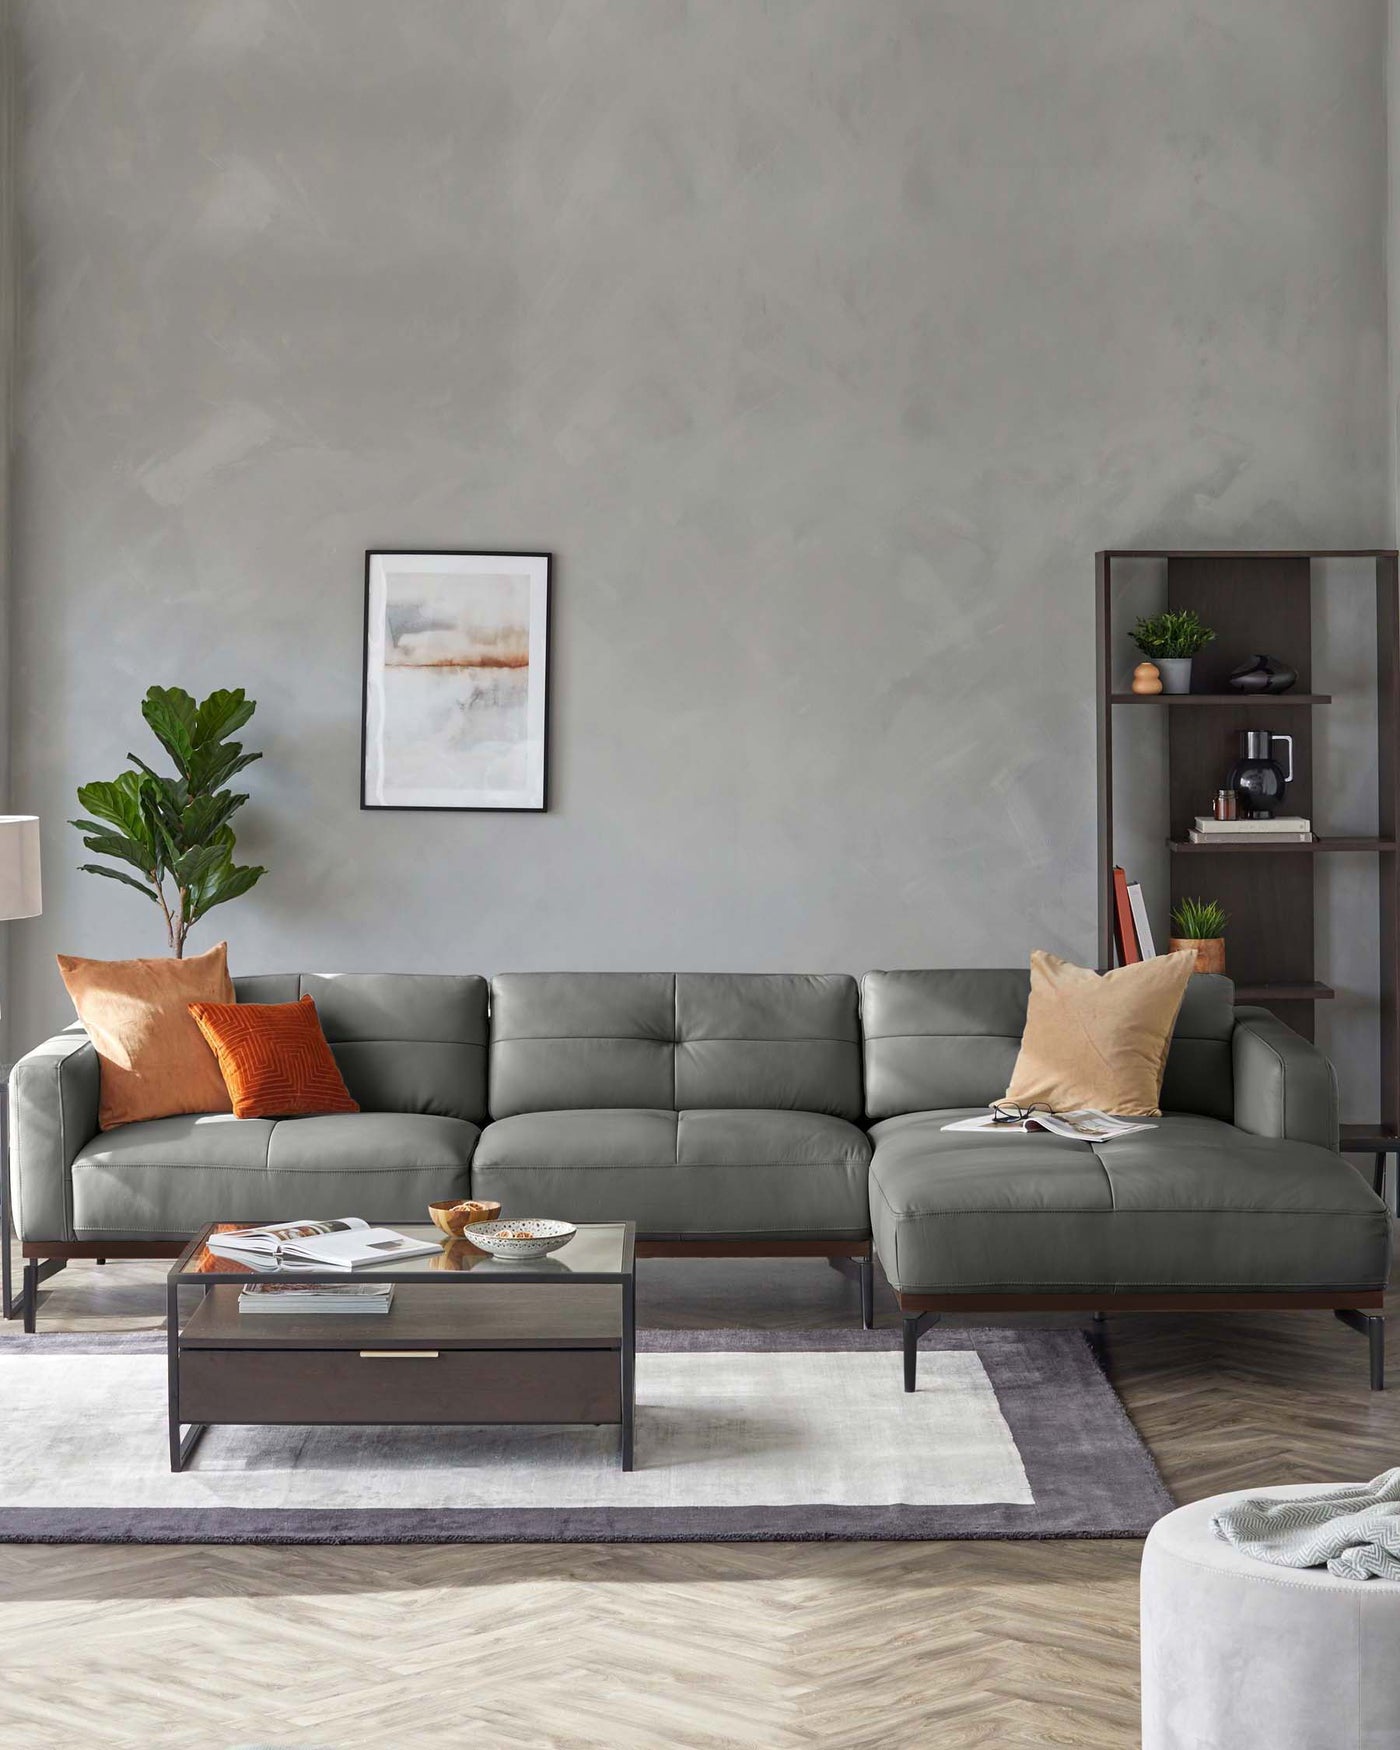 Modern living room setup featuring a grey L-shaped sectional sofa with plush cushions and a sleek dark wooden frame. In front of the sofa is a rectangular wooden coffee table with a dark finish, holding decorative items and books. To the right, a dark wood bookshelf is adorned with a variety of decorative objects and plants, contributing to a contemporary aesthetic.